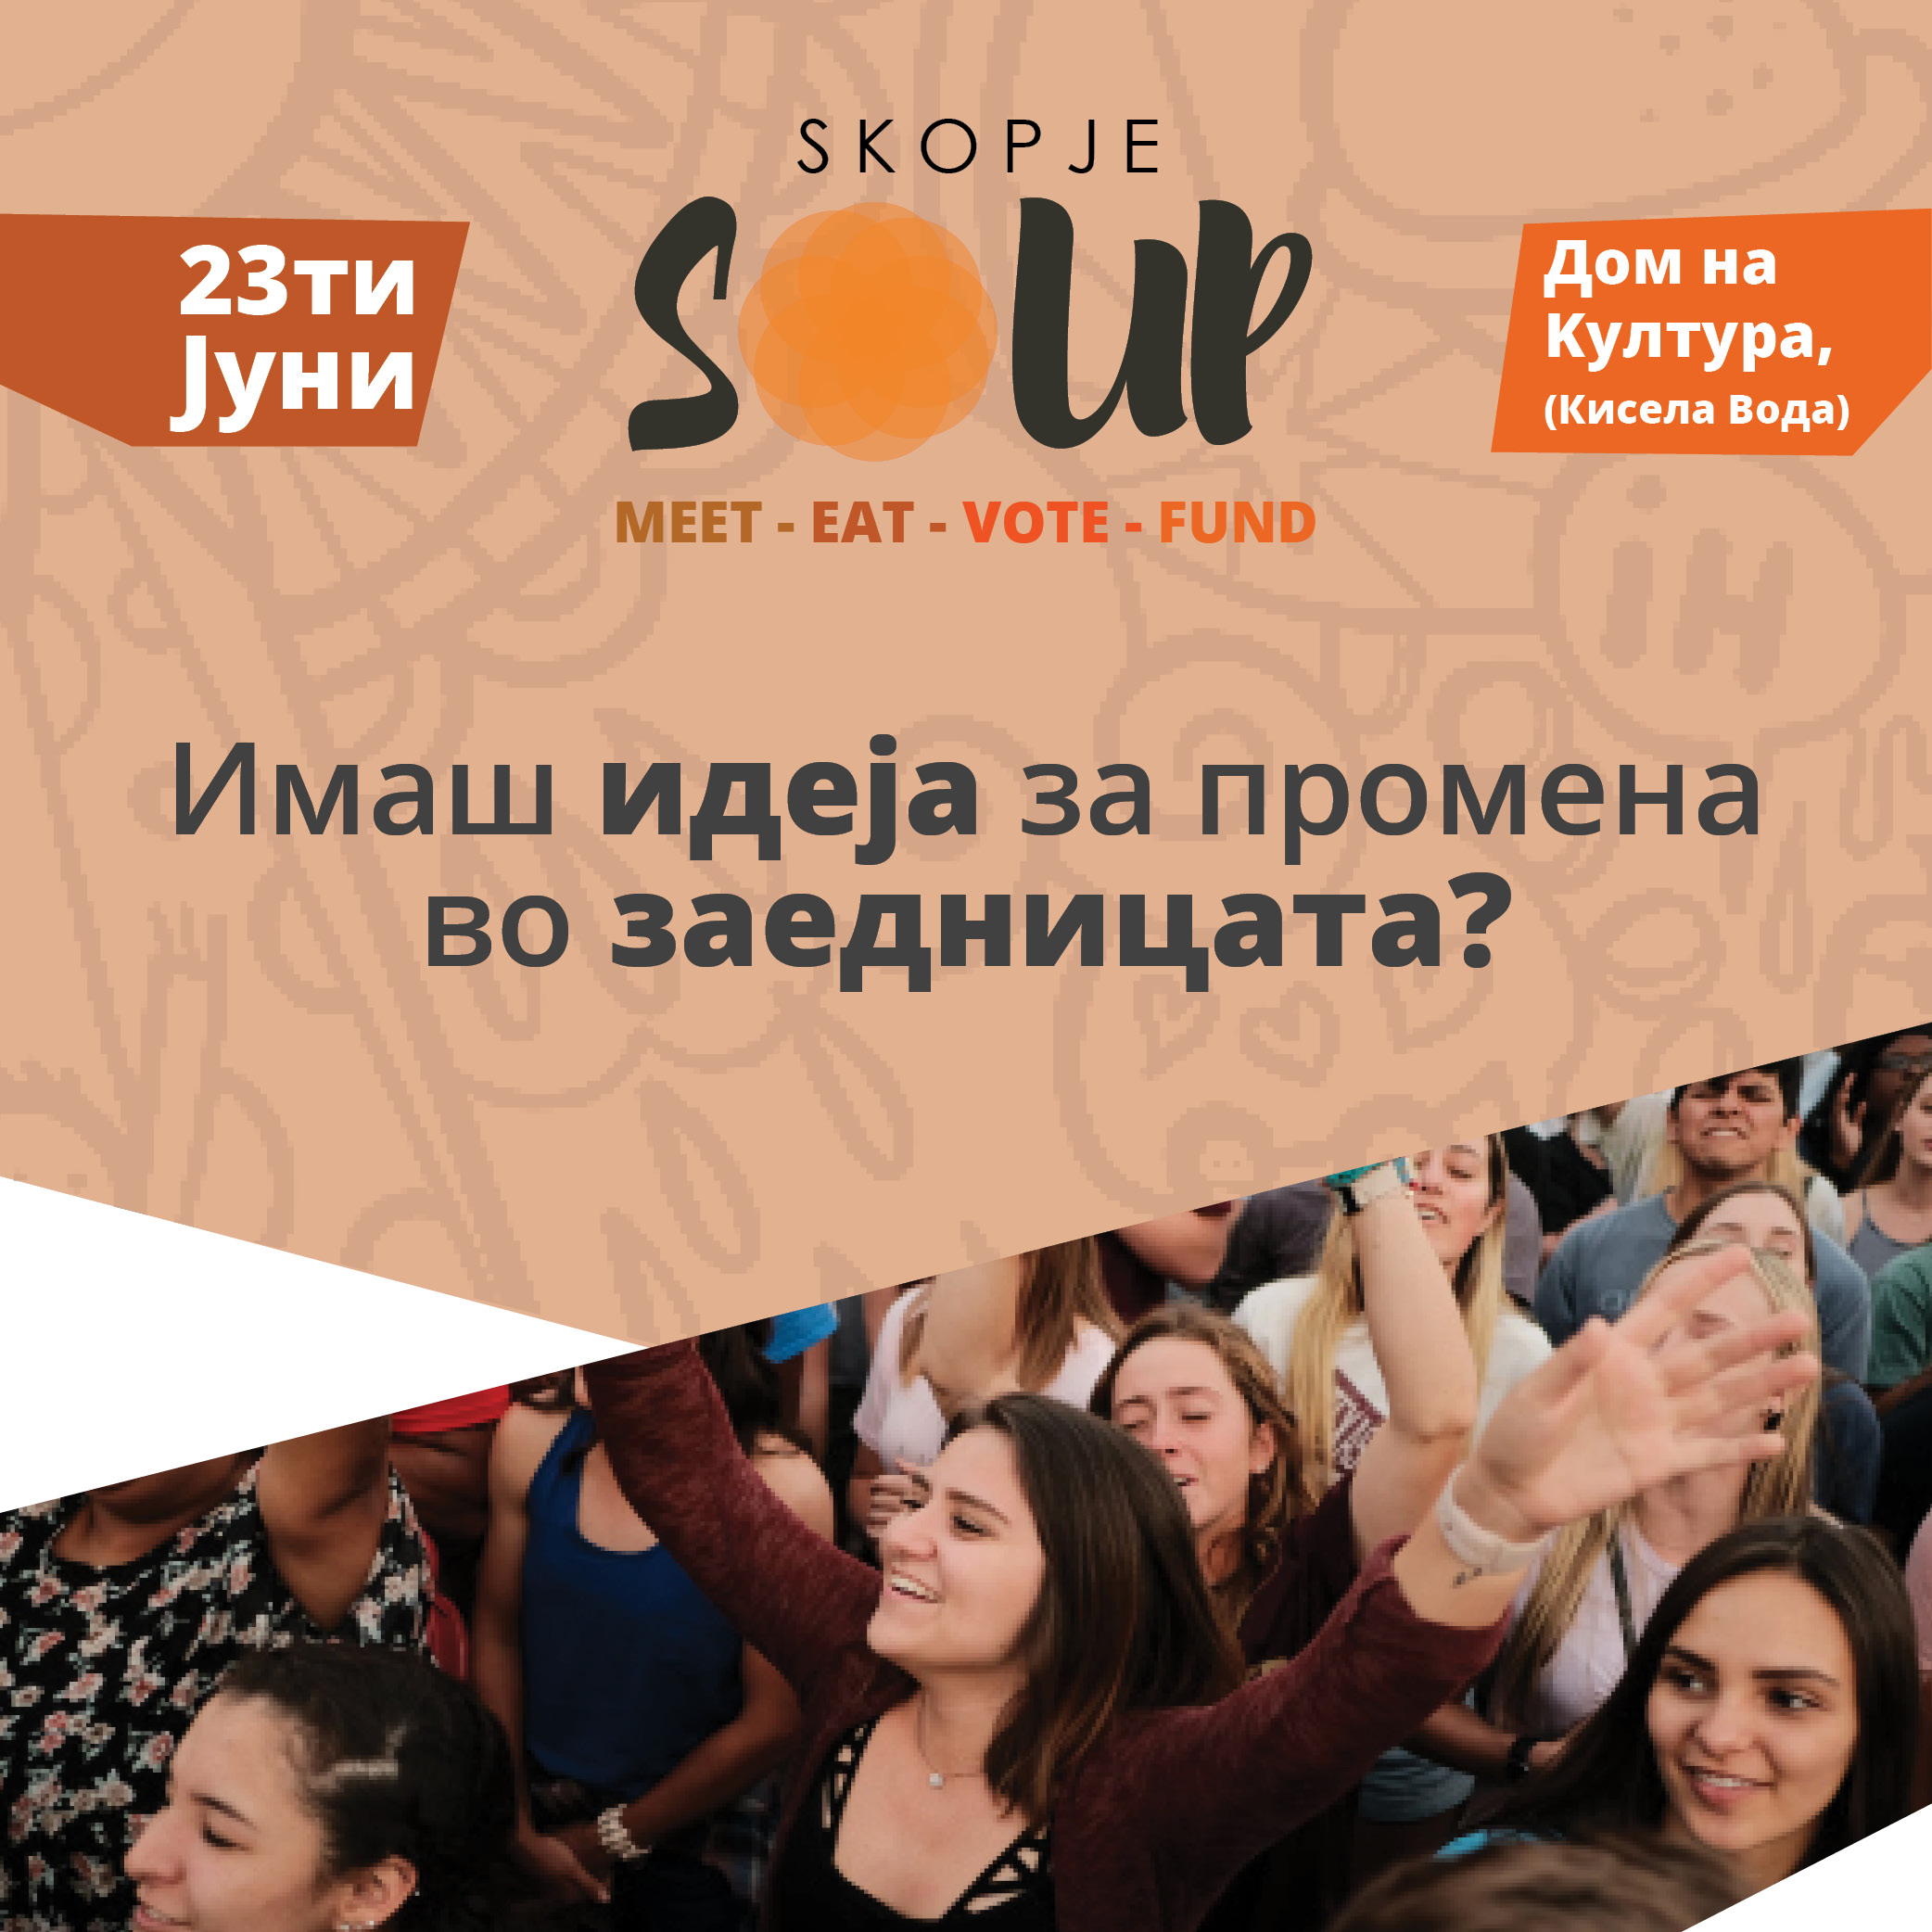 You are currently viewing Skopje SOUP – For strong community